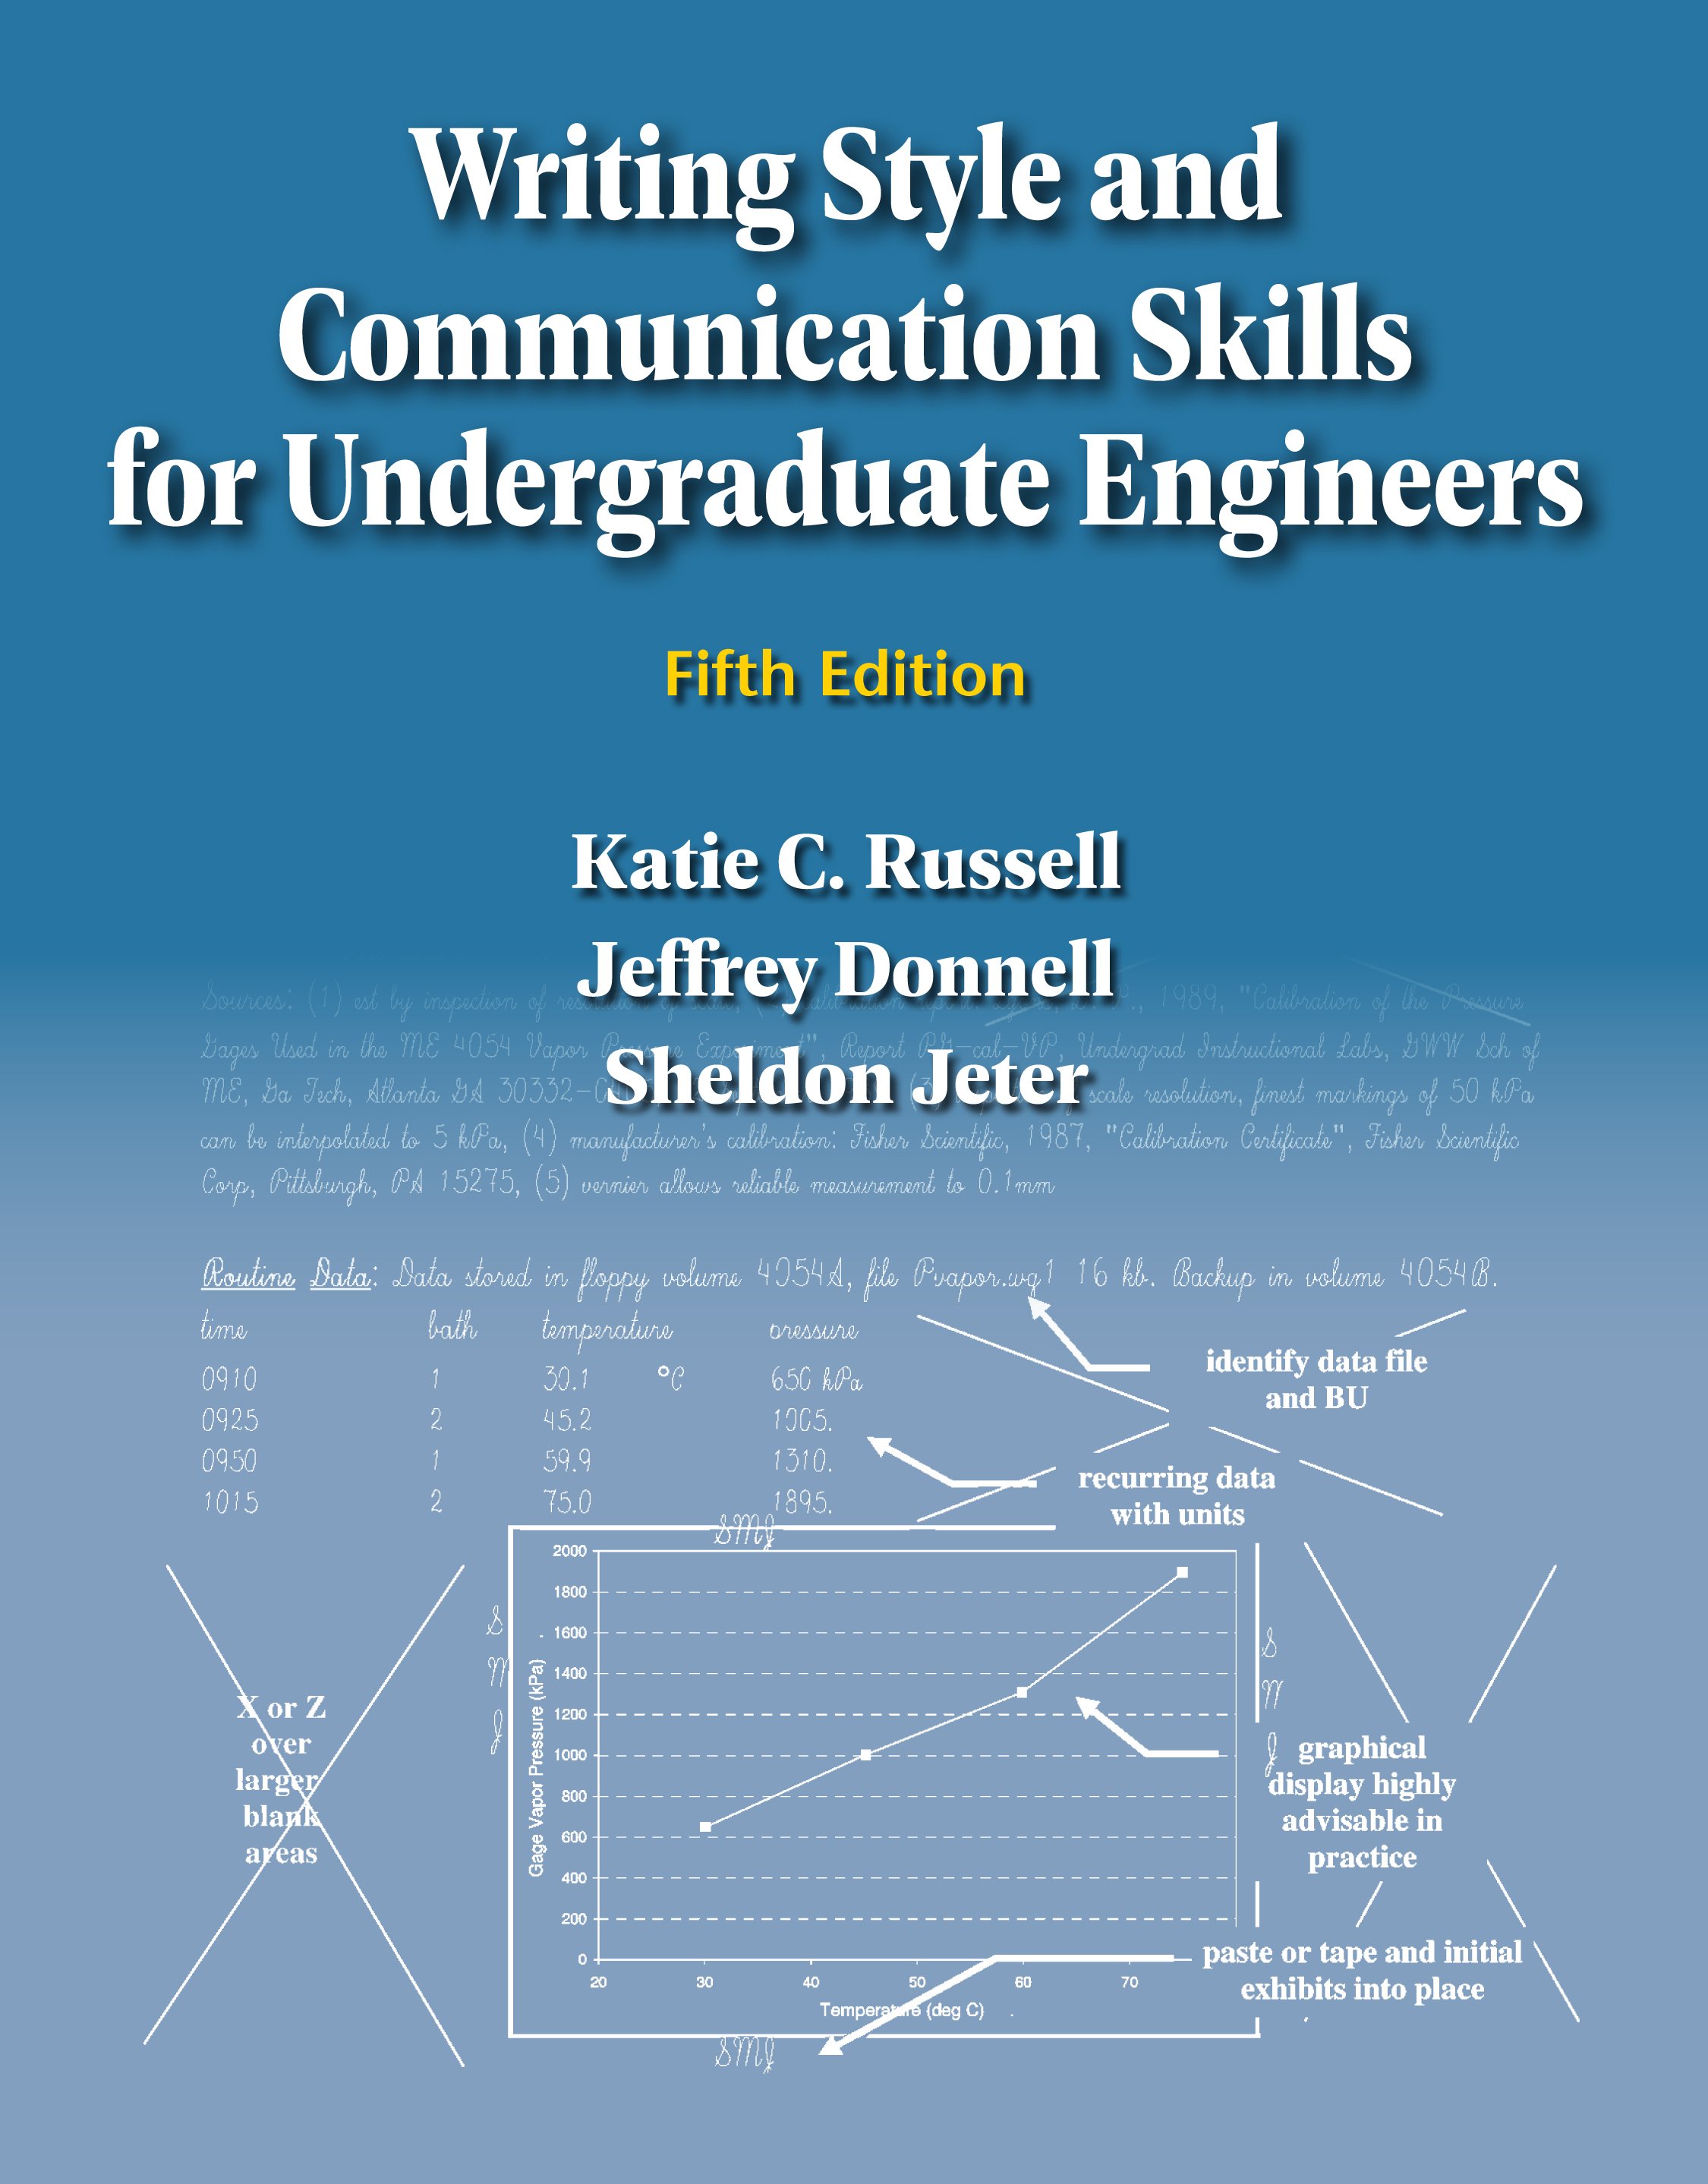 Writing Style and Communication Skills for Undergraduate Engineers: The Online, Annual Edition.